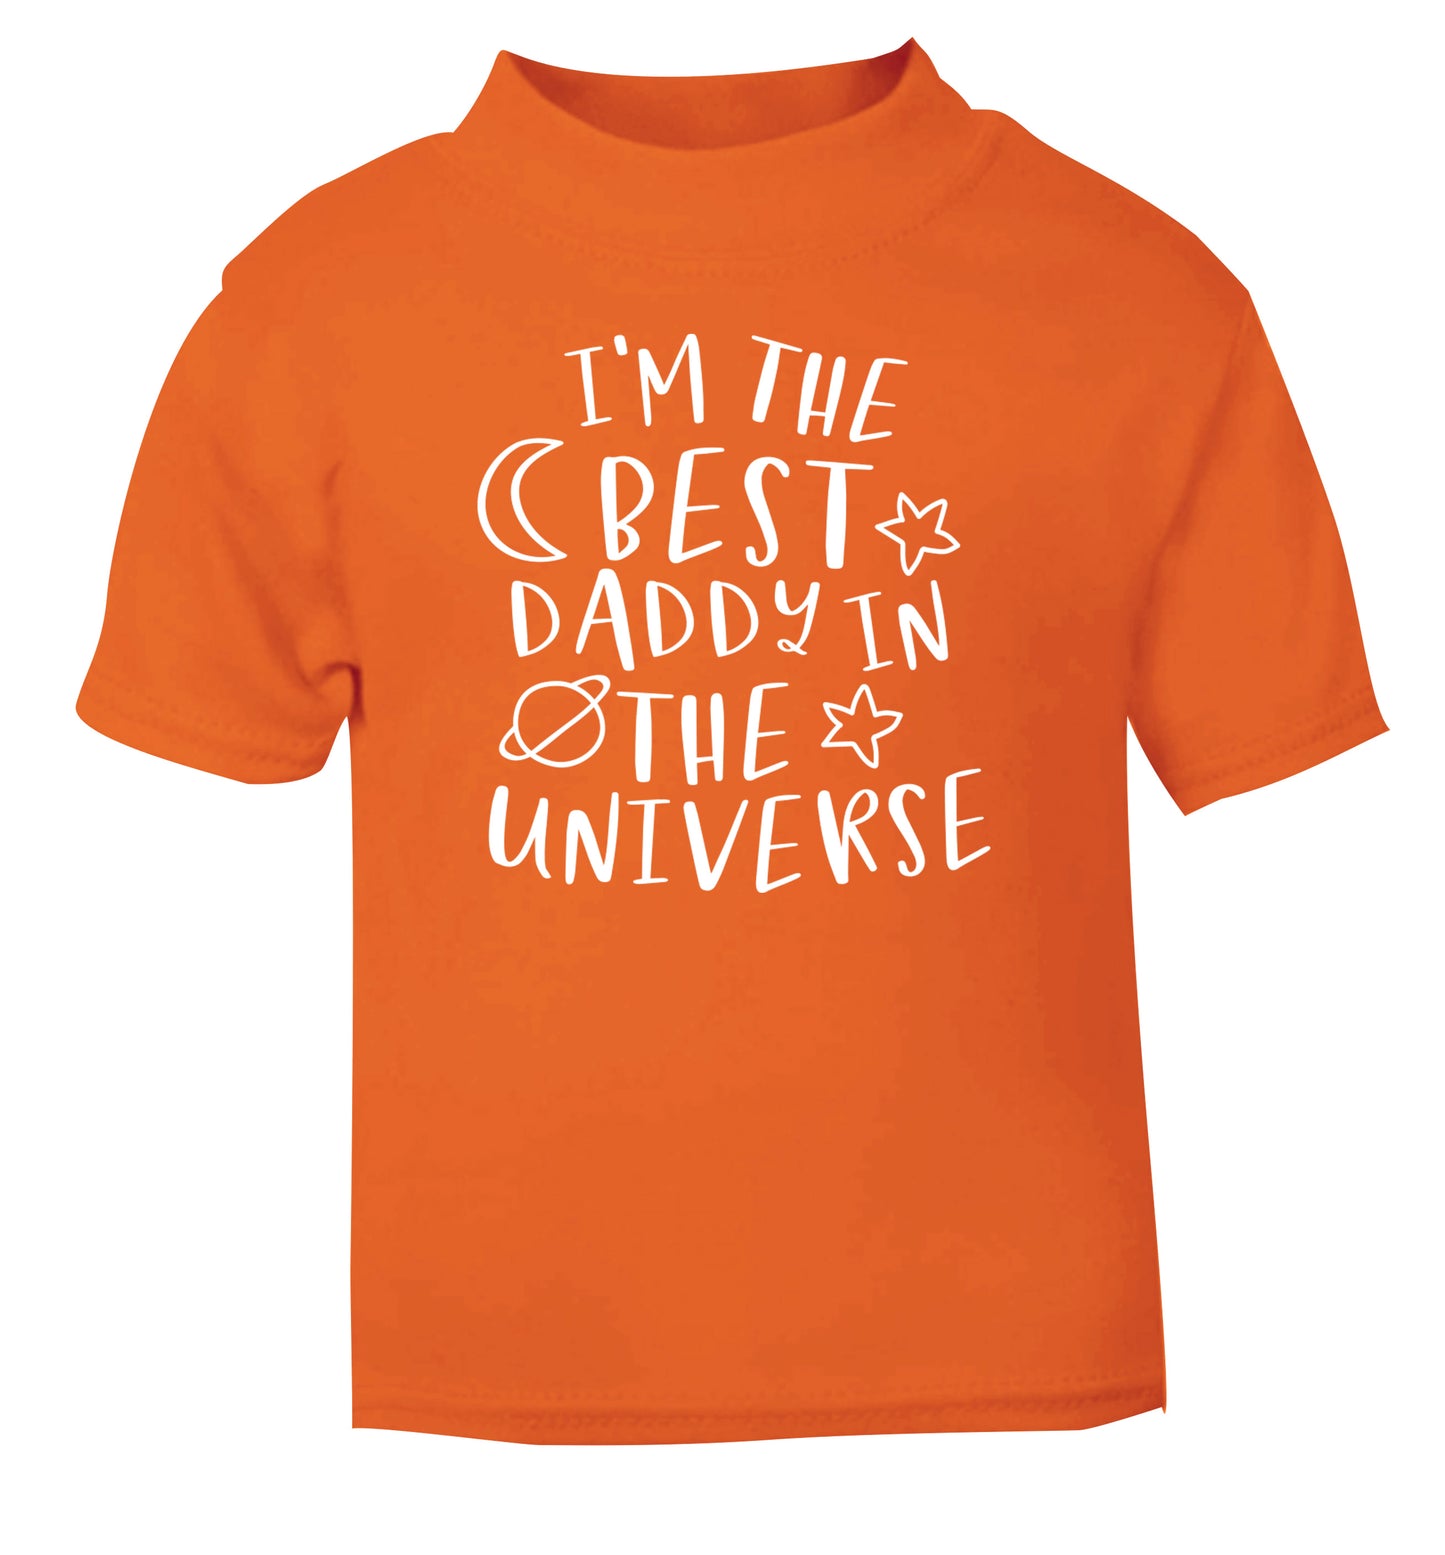 I'm the best daddy in the universe orange Baby Toddler Tshirt 2 Years